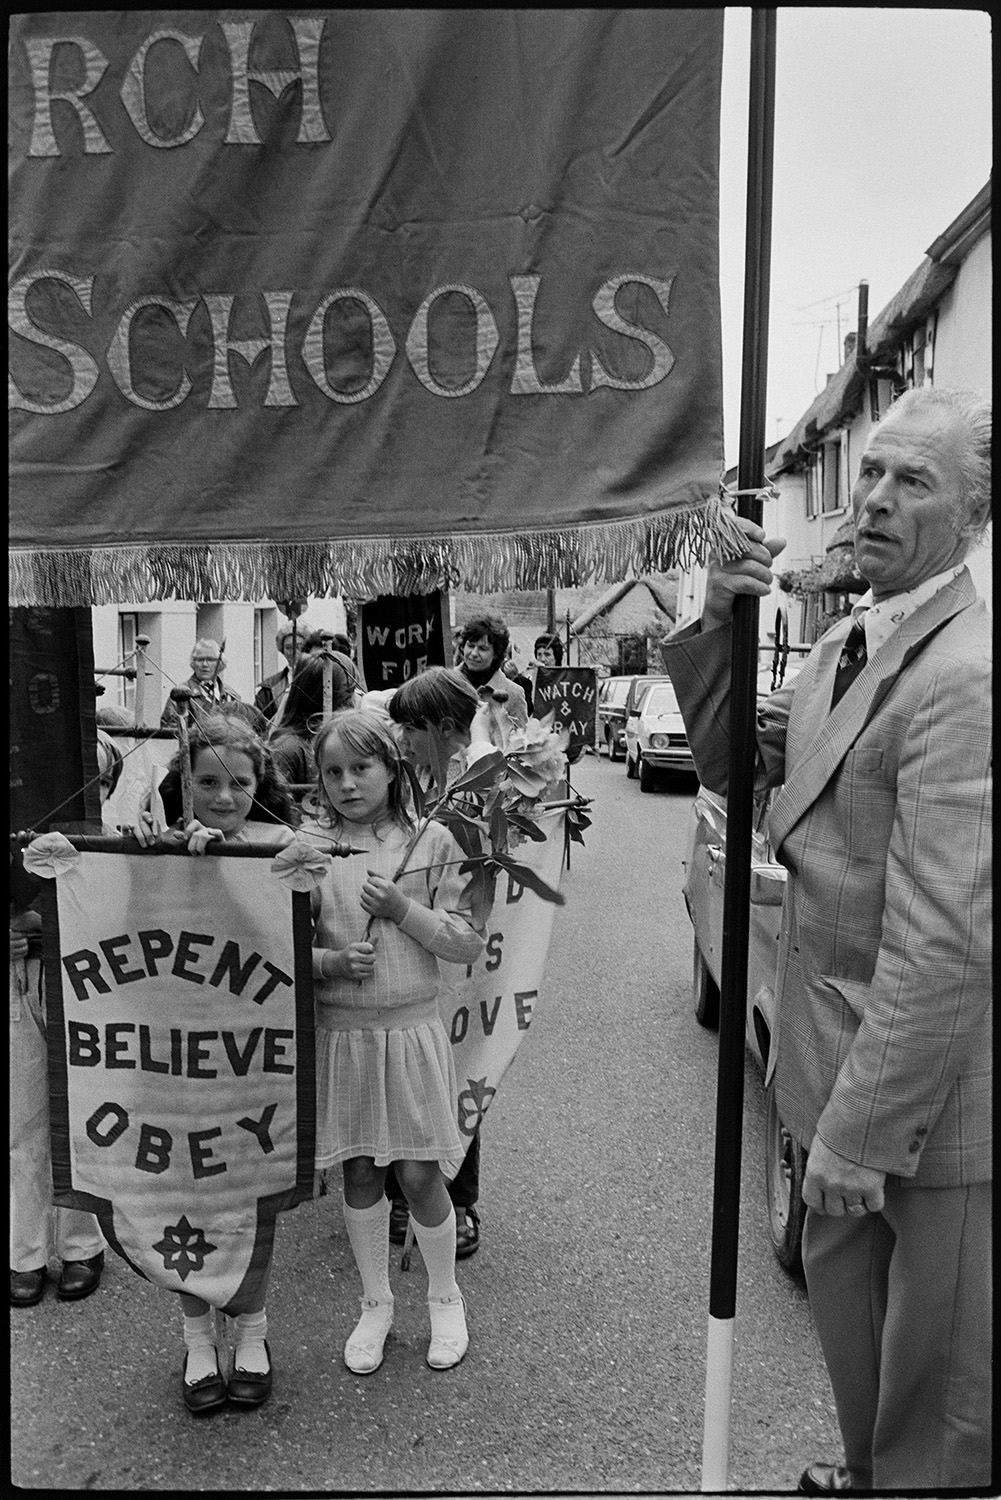 Church Sunday School Parade with banners and Silver Band marching behind garland.
[Children in the Hatherleigh Church Sunday Schools Parade standing in a road in Hatherleigh behind a man carrying a large banner. The children are carrying smaller banners.]